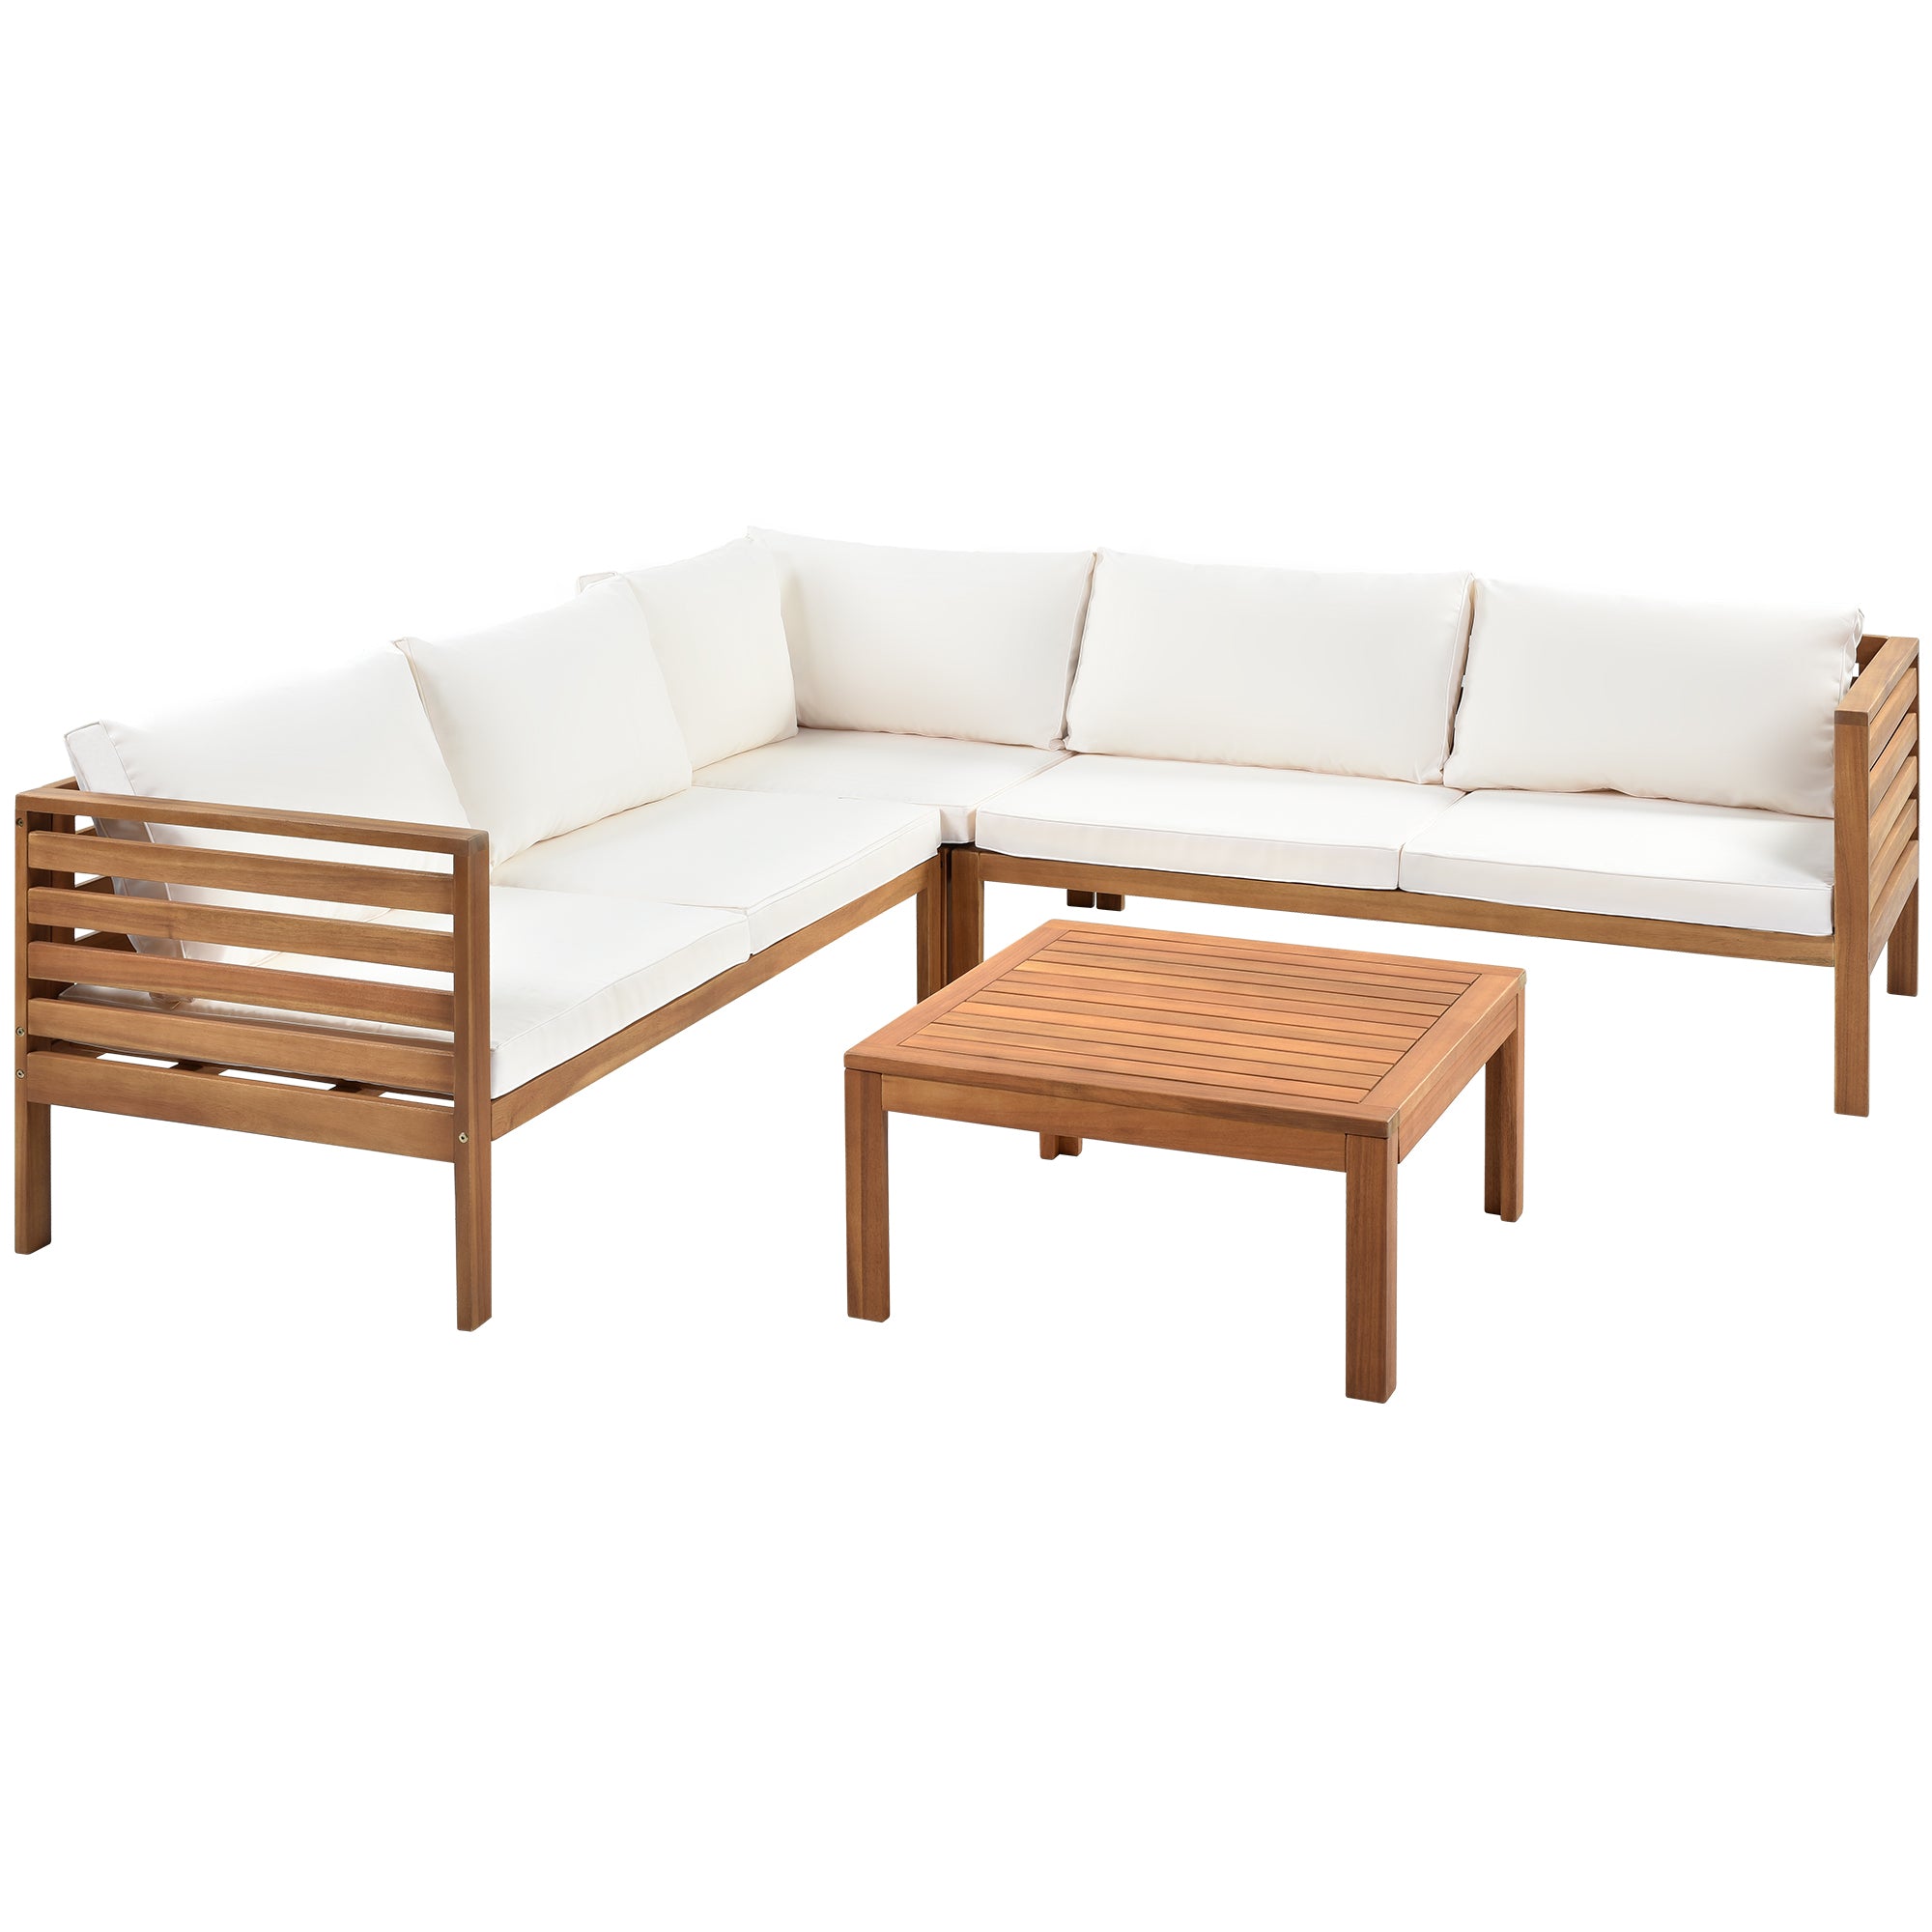 Outdoor Wood Sofa Set with Beige Cushions, Water-Resistant & UV Protected Texture, Coffee Table